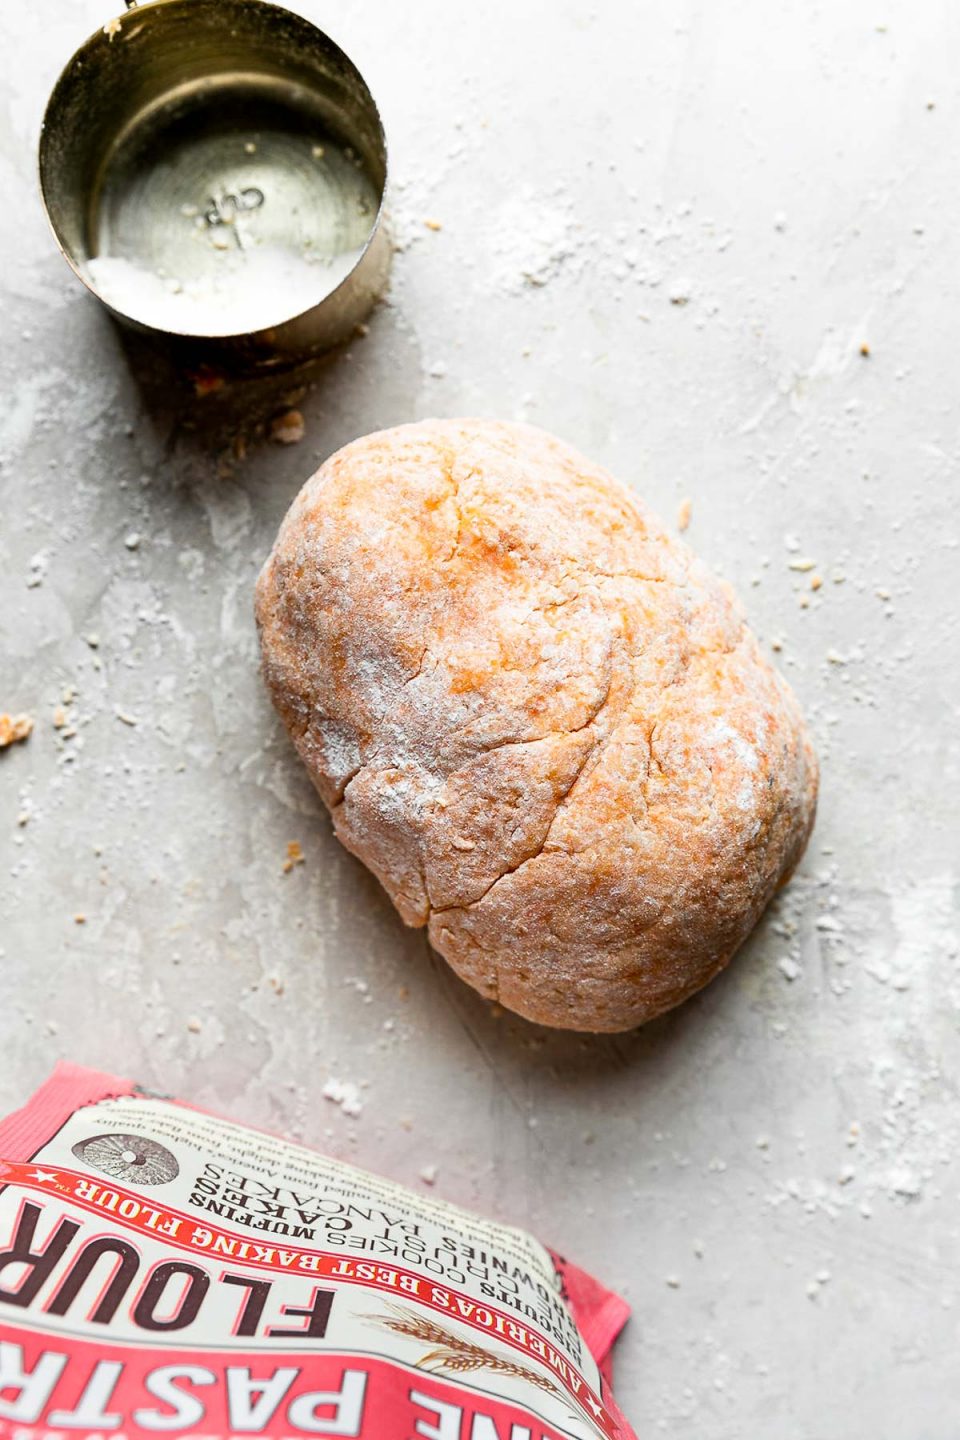 A dough ball of homemade sweet potato gnocchi sits atop a white plaster textured surface dusted with white pastry flour. A gold measuring cup filled with extra pastry flour and a bag of Bob's Red Mill Unbleached White Fine Pastry Flour sits upright alongside the formed dough ball.